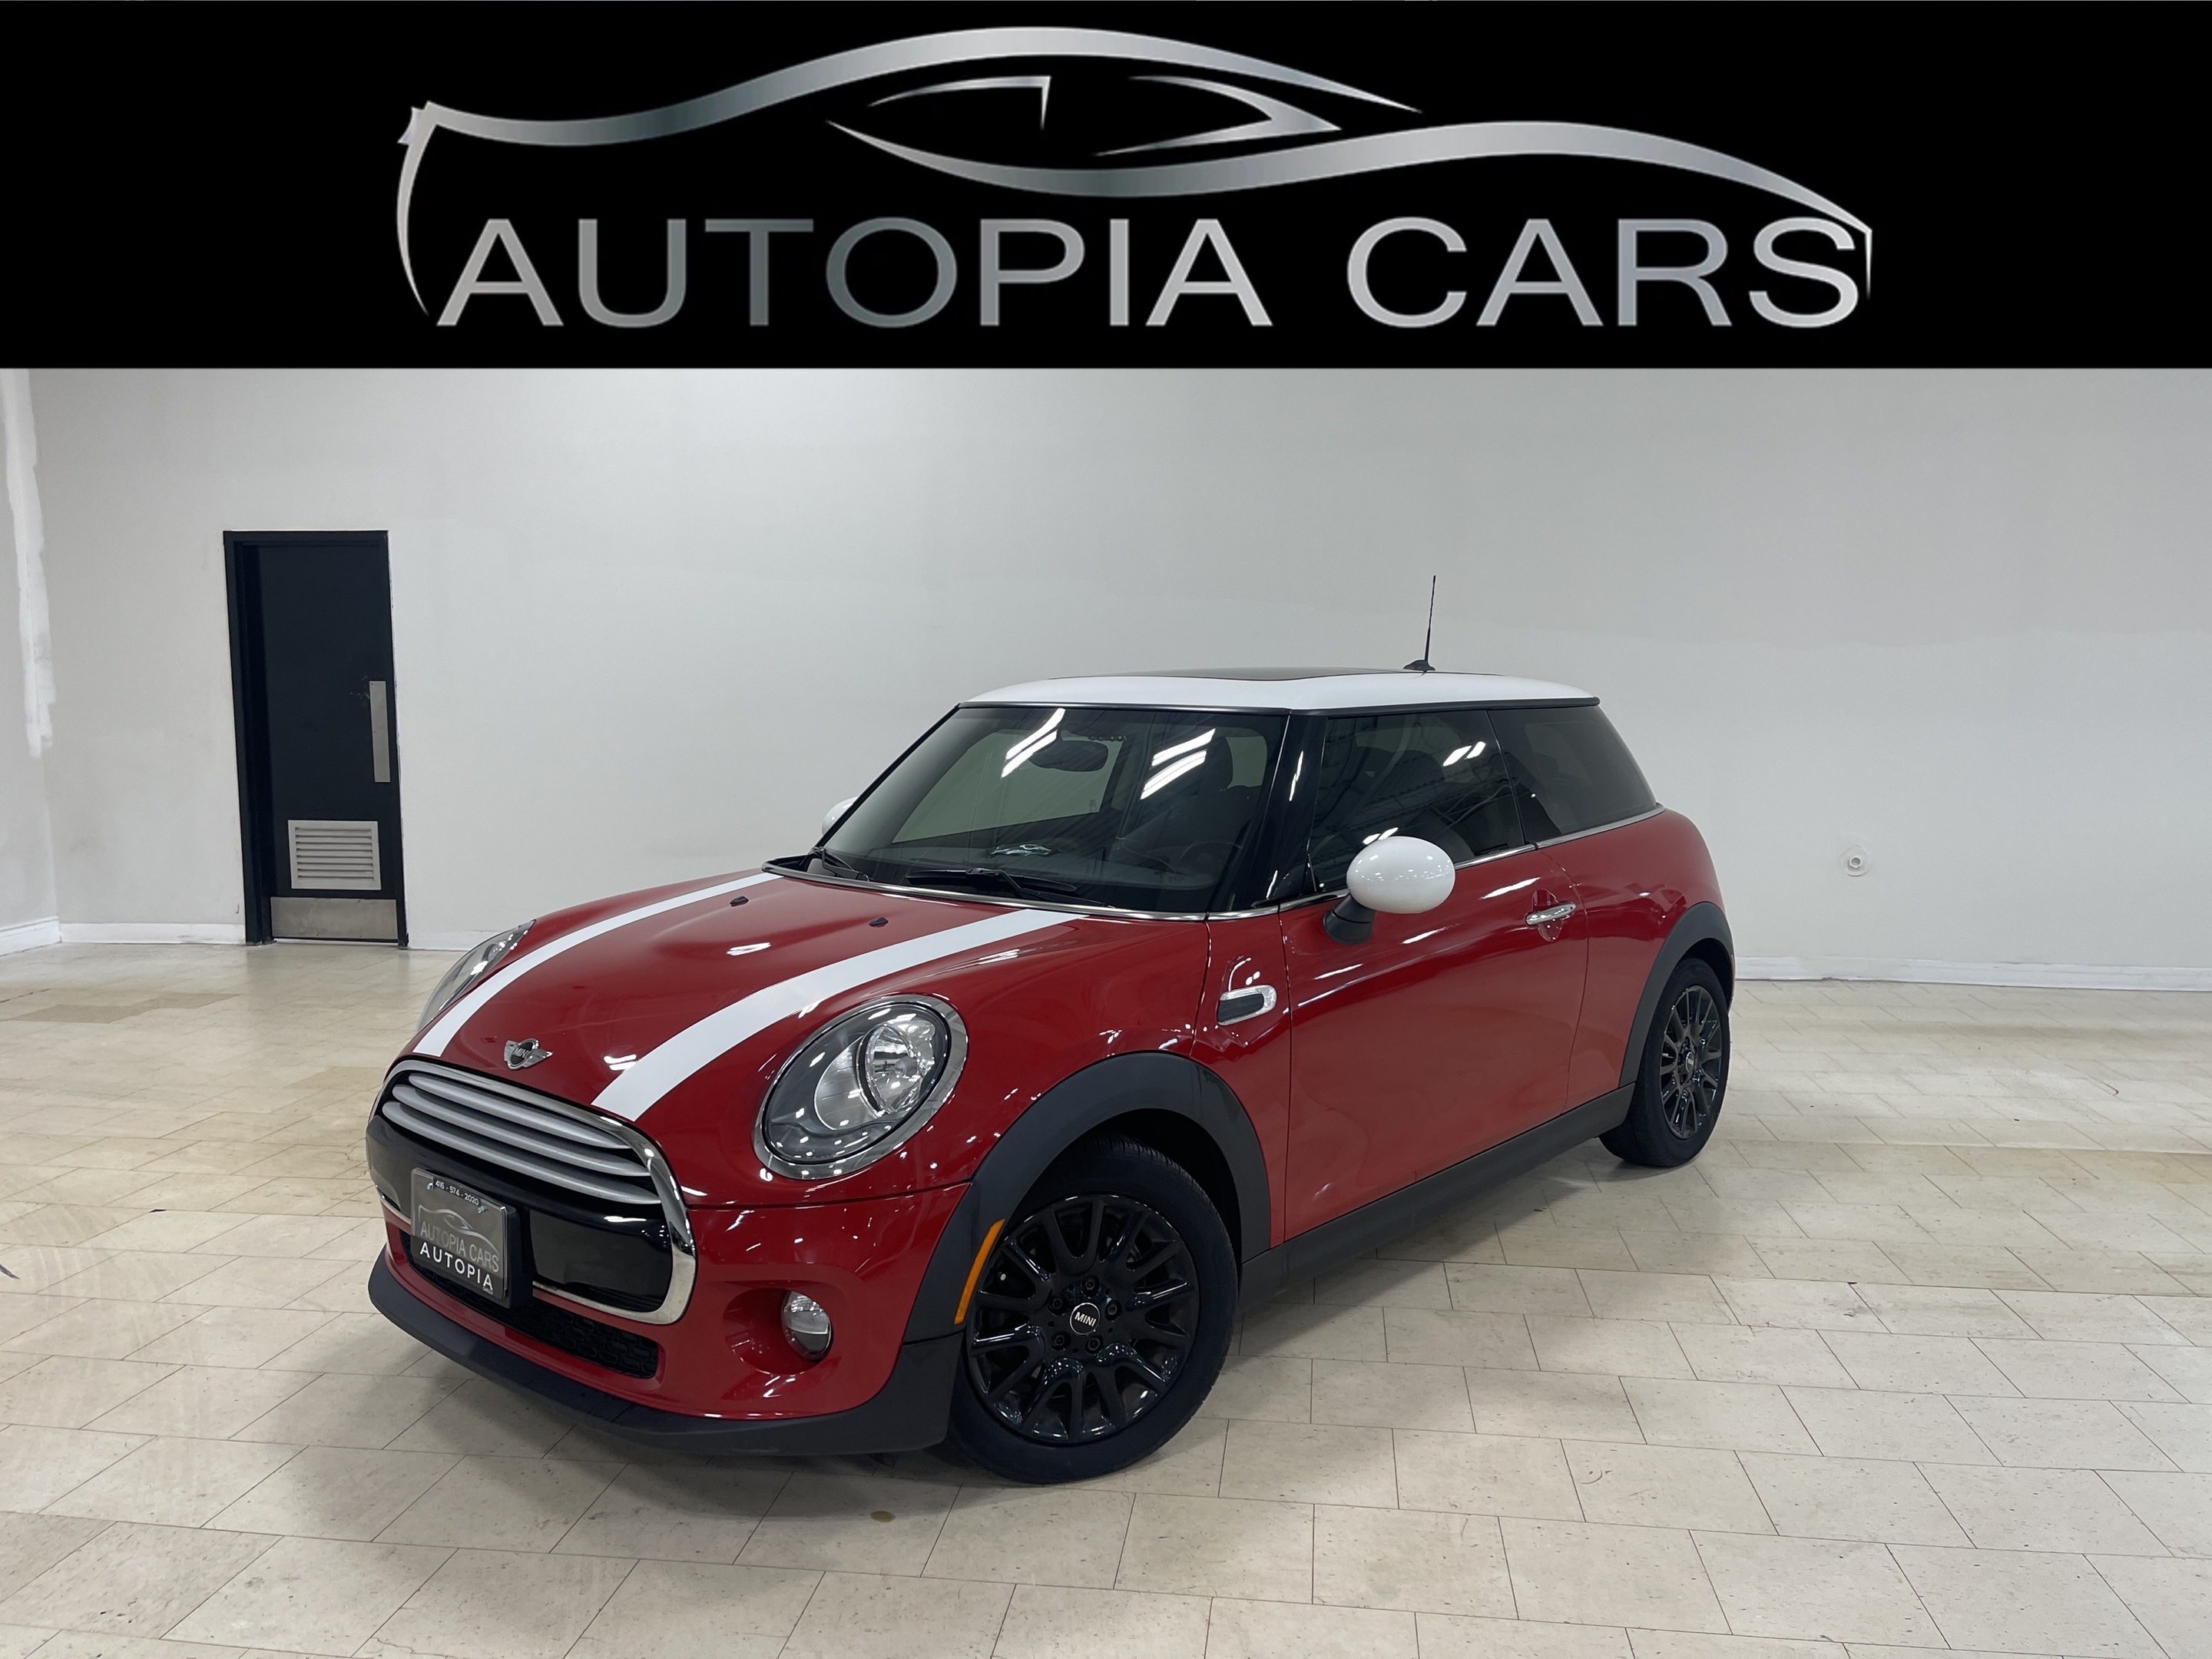 2015 MINI Cooper Hardtop HB AUTOMATIC PANORAMIC SUNROOF ACCIDENT FREE